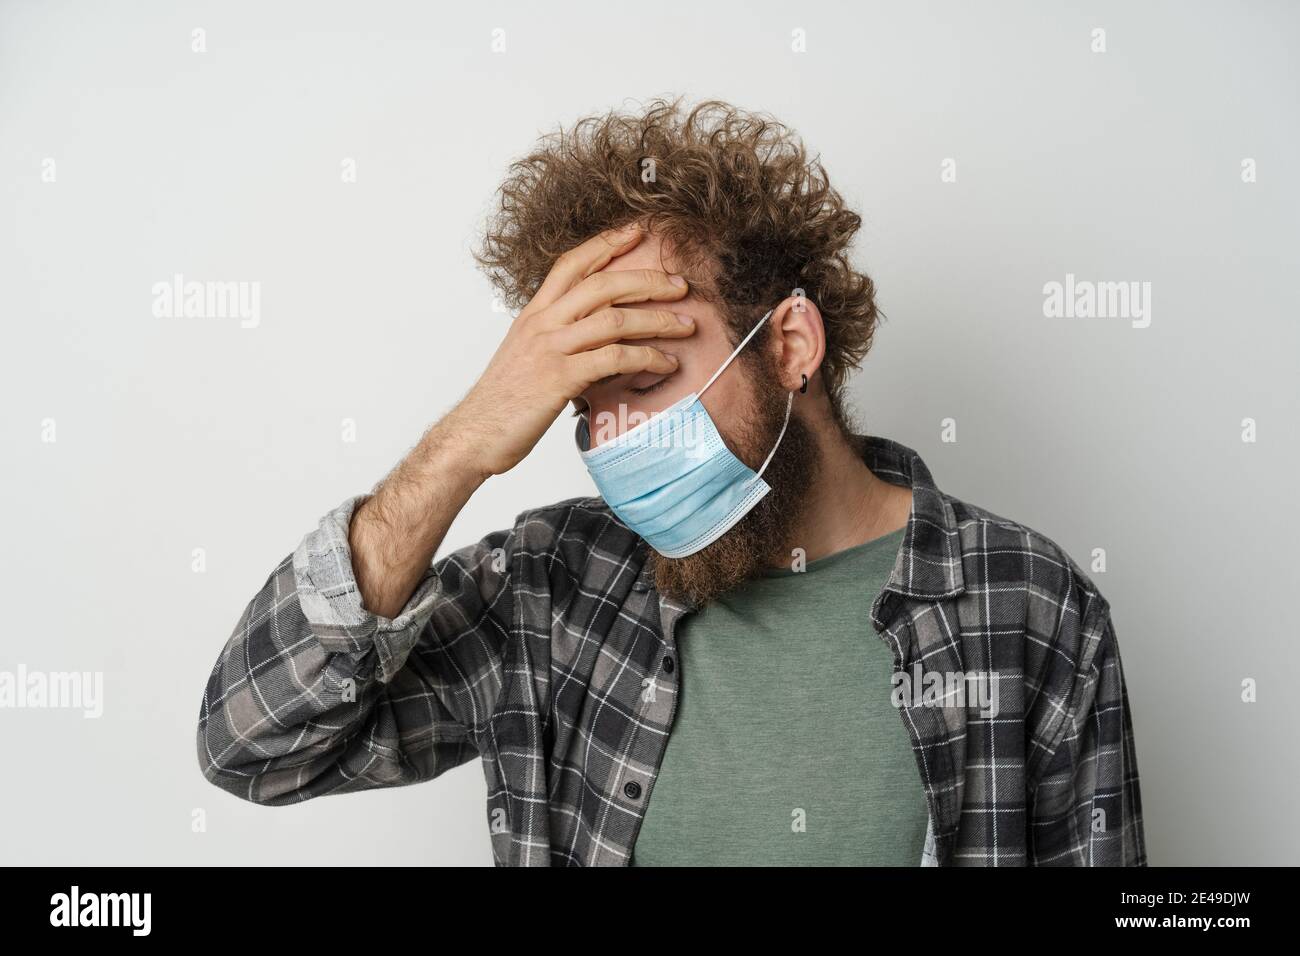 Suffer of headache wearing protective sterile medical mask on his face to protect coronavirus curly hair young man wearing plaid shirt and olive t Stock Photo